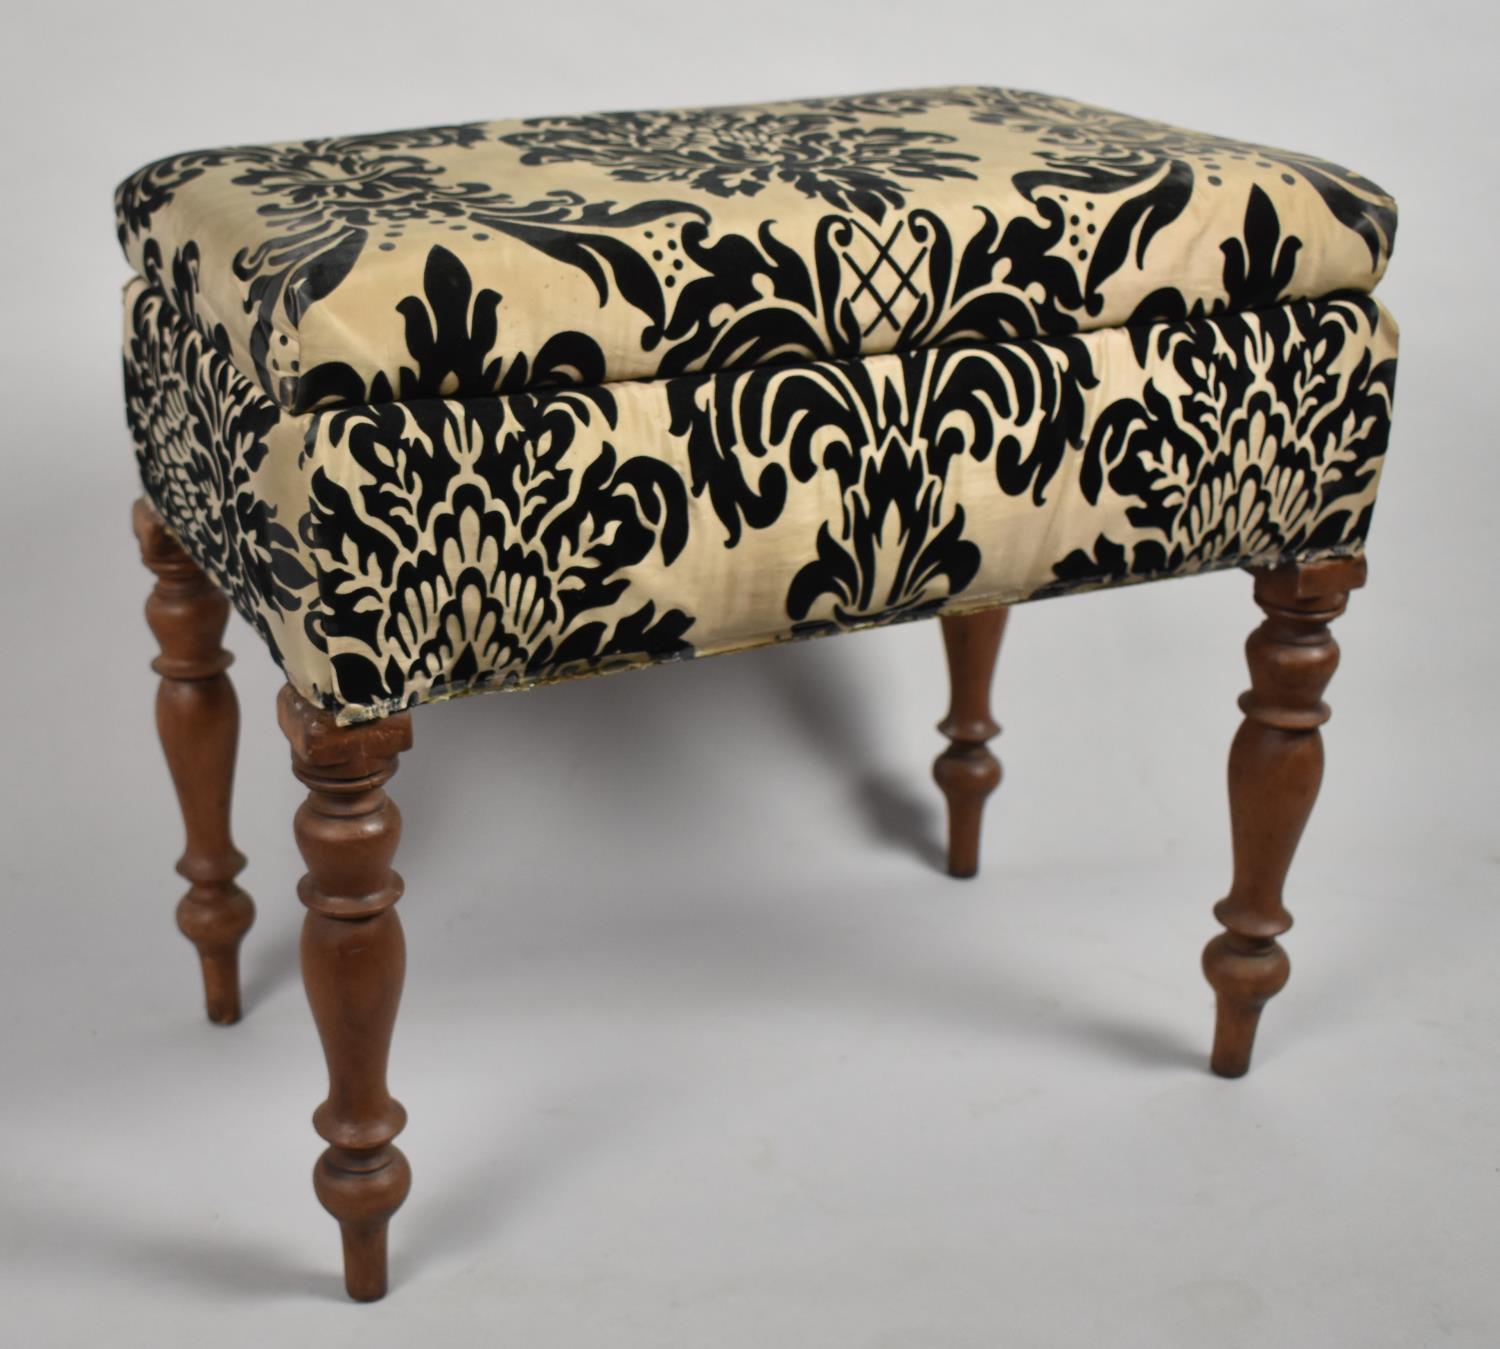 A Modern Upholstered Lift Top Box Stool, 53cm wide